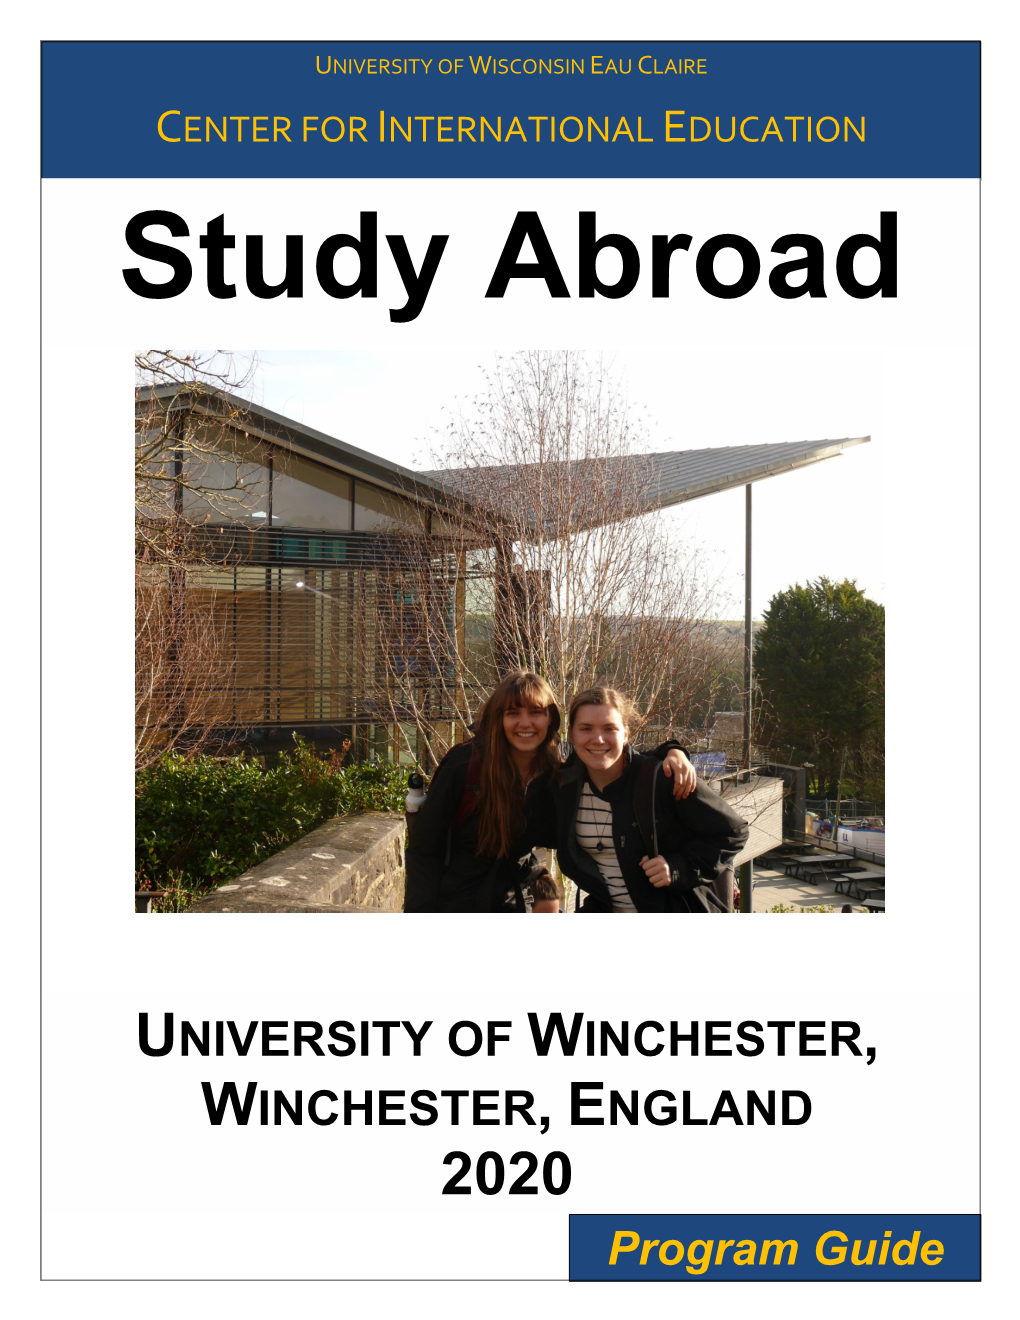 University of Winchester, Winchester, England